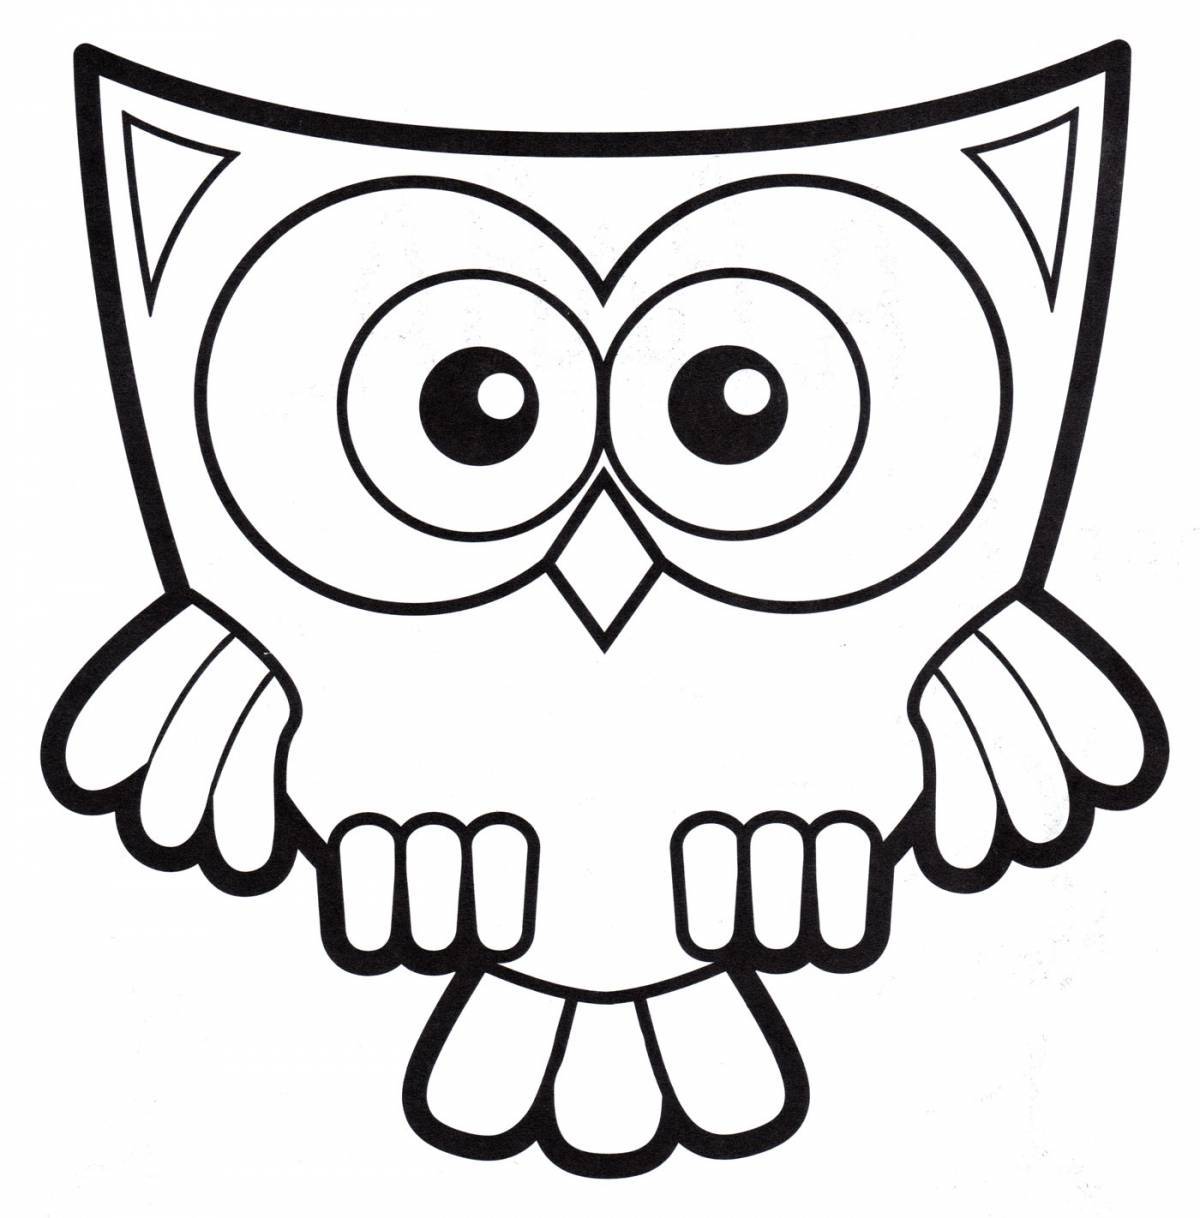 Animated owl coloring book